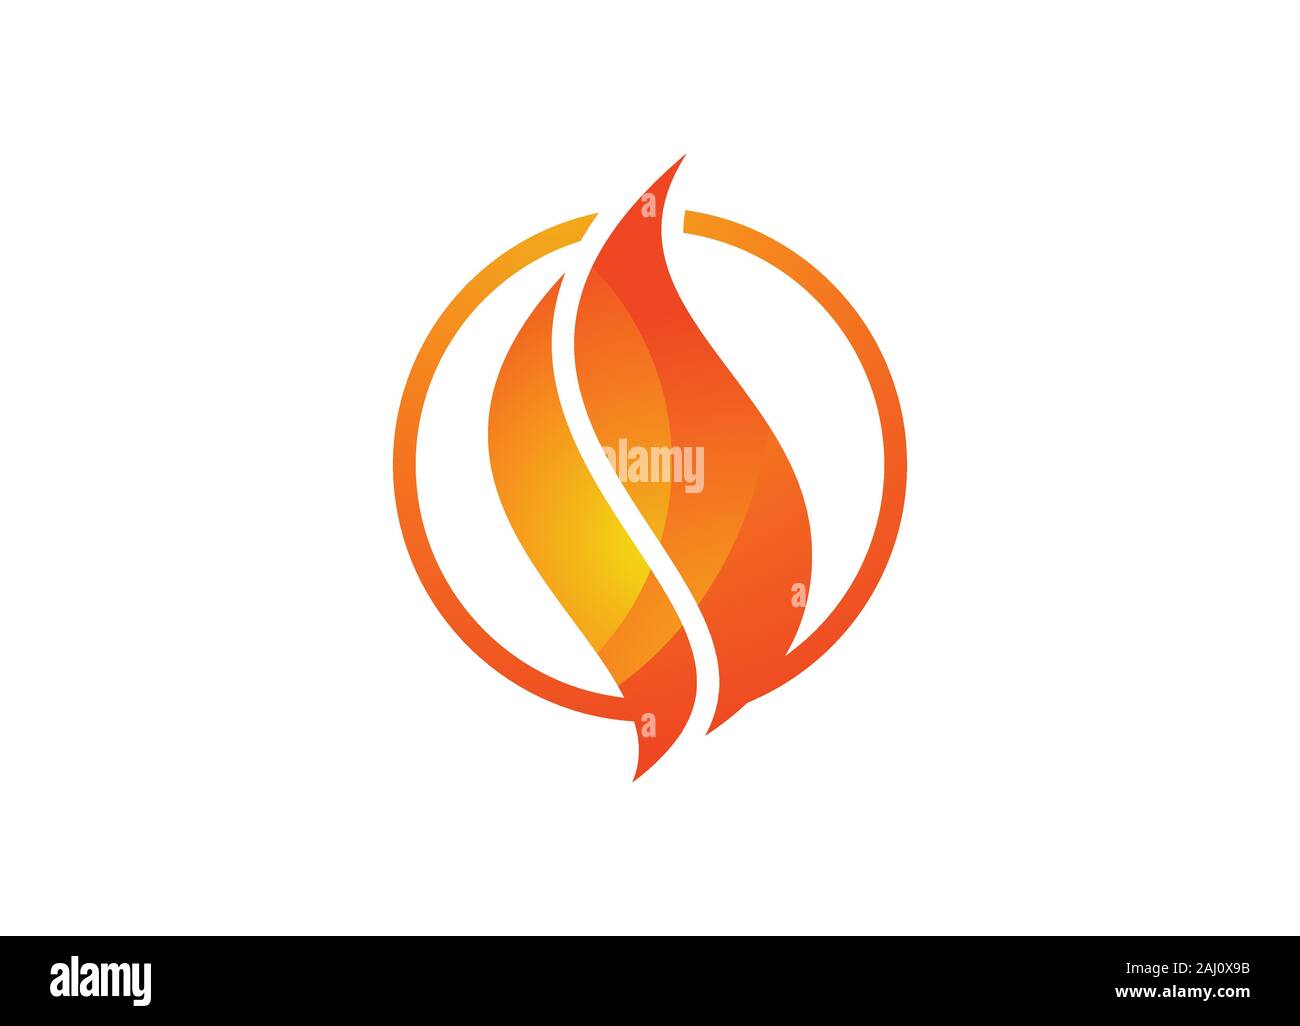 Flame logo design. Fire icon, oil and gas industry symbol Stock Vector